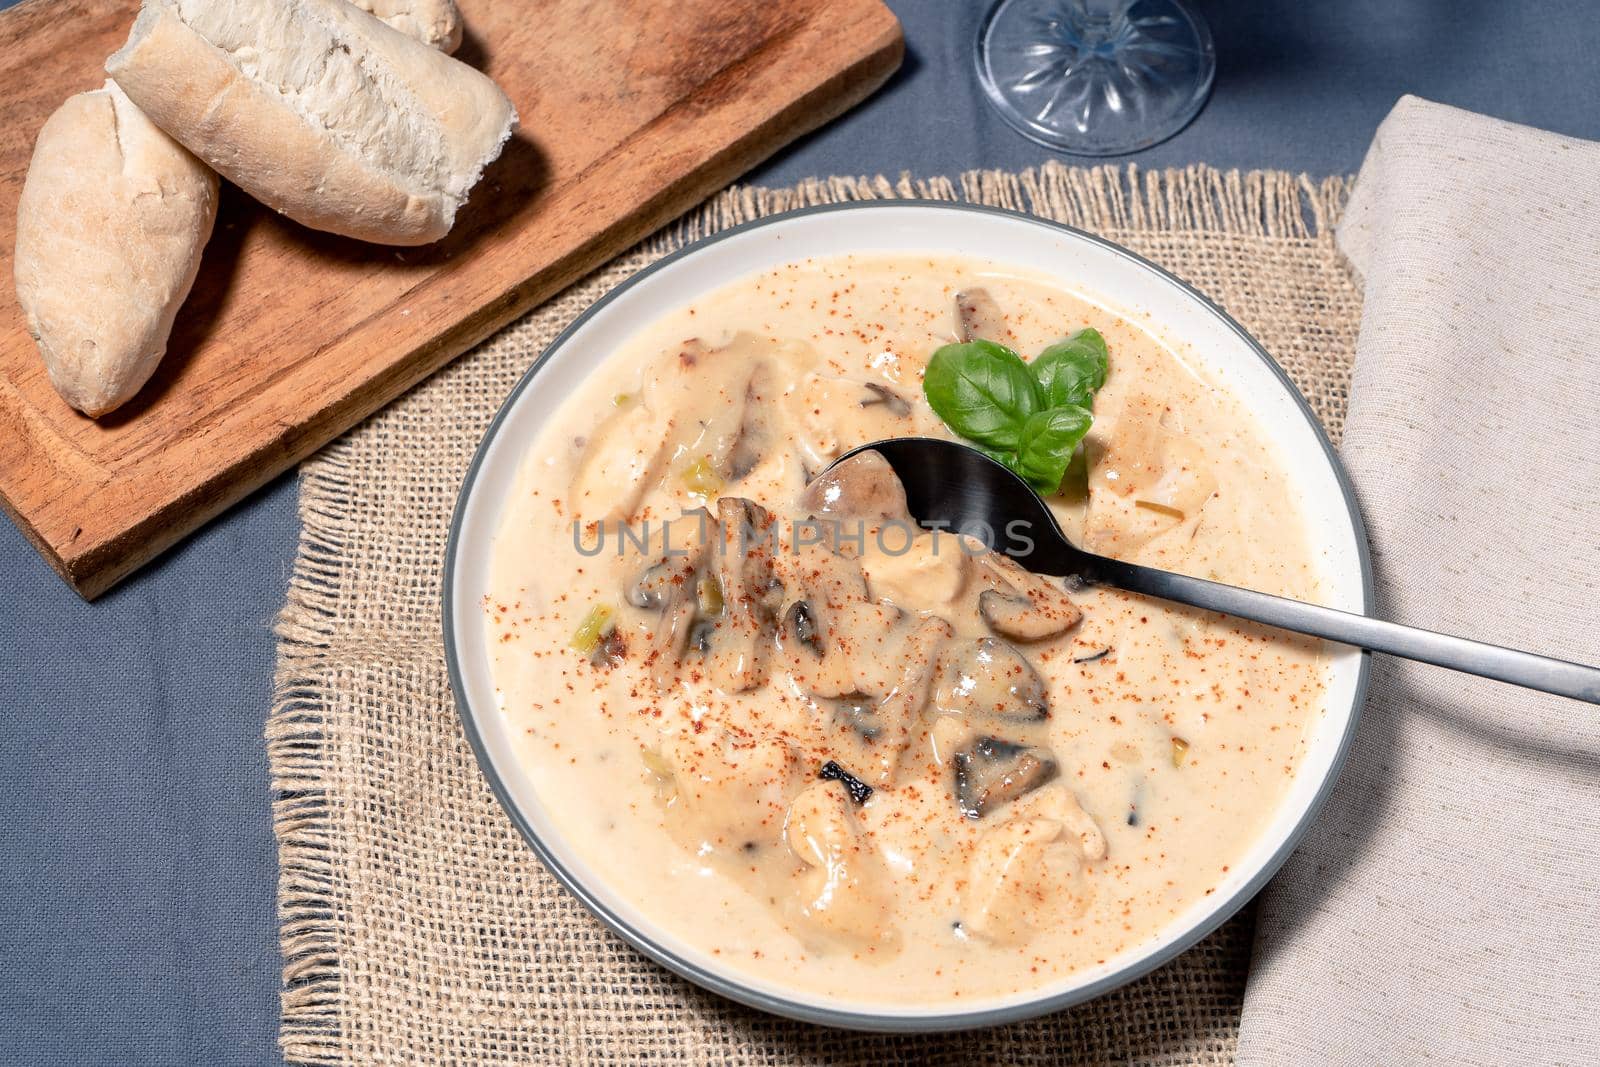 A Homemade cream of chicken and mushroom soup or French style chicken fricassee, in a soup bowl on a wooden table. Aerial view